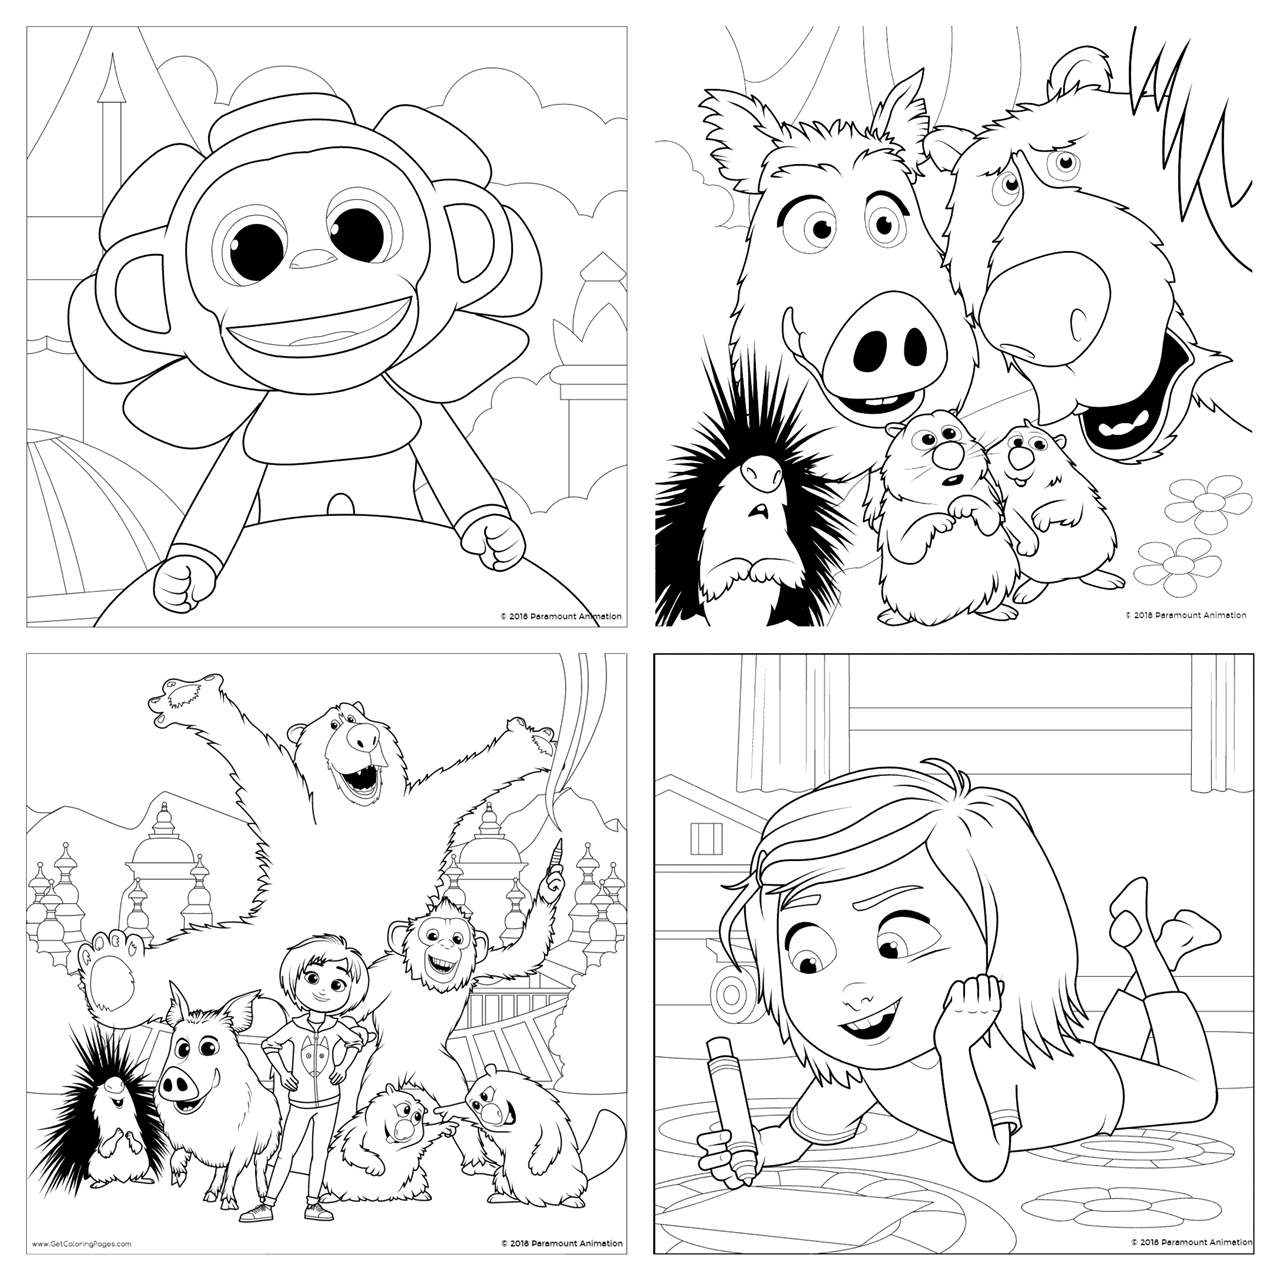 Free Wonder Park Characters Coloring Pages printable